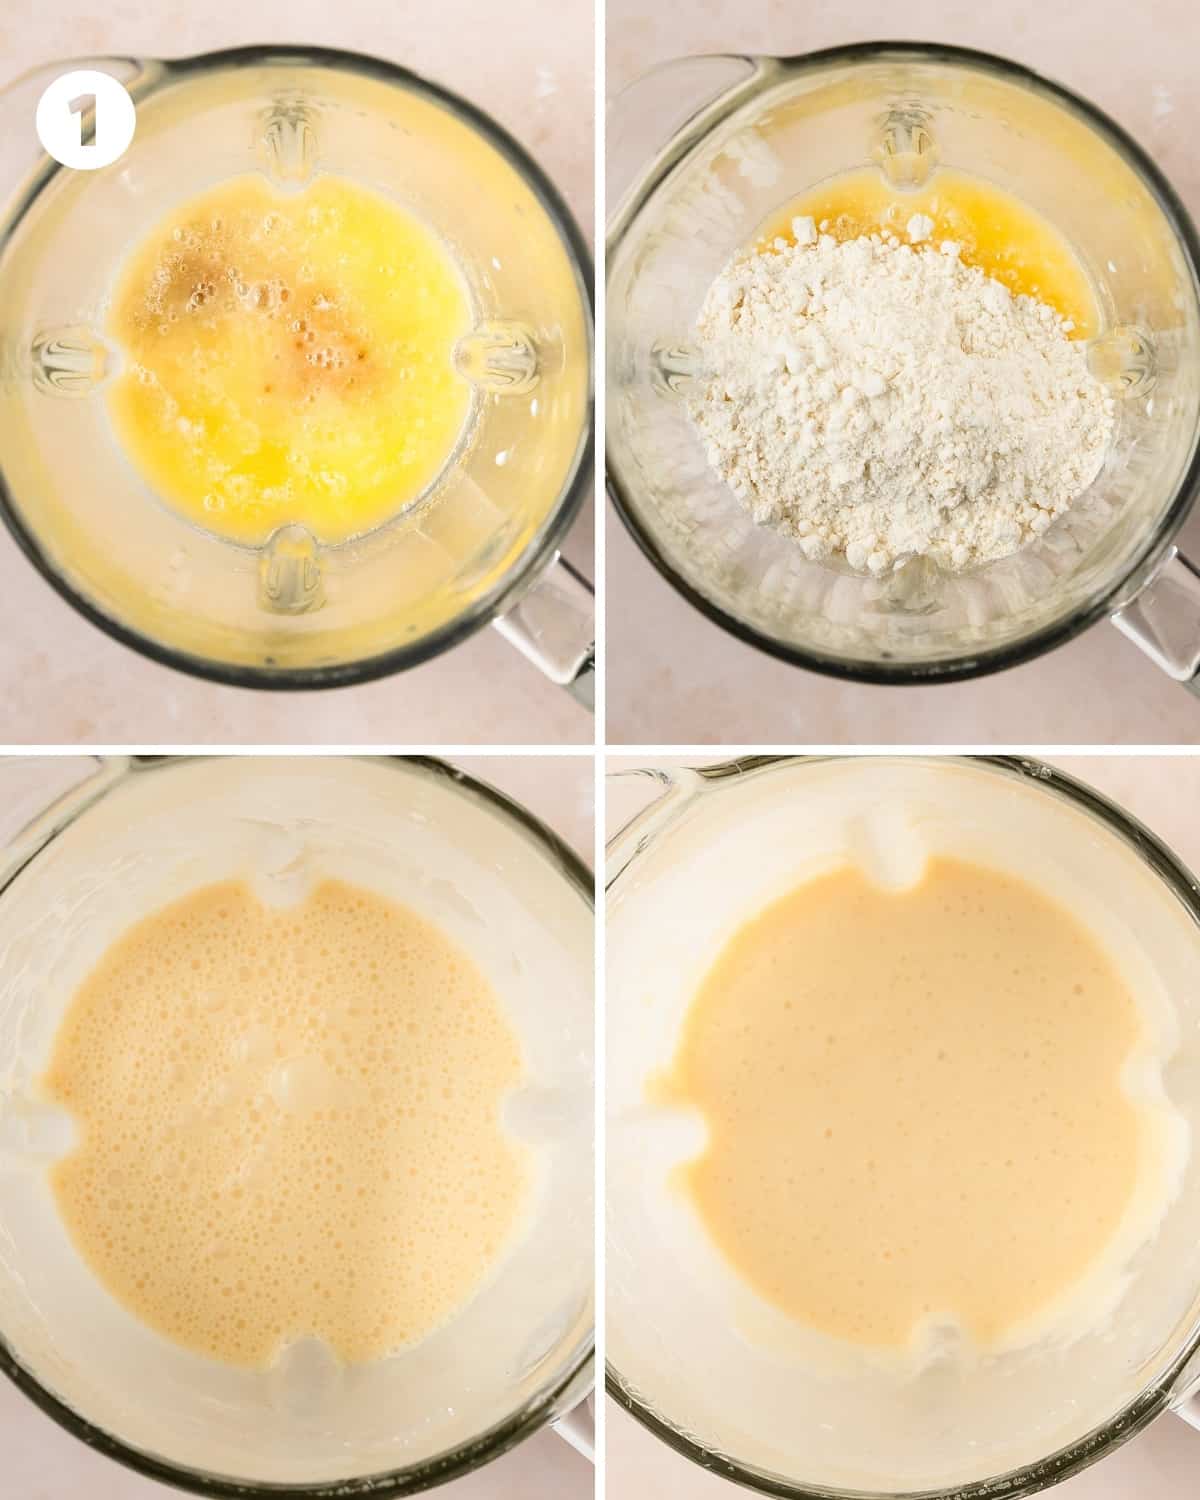 Add milk, melted and slightly cooled butter, eggs, vanilla extract, almond extract and pancake mix to a high speed blender. The wet ingredients can be added in any order, just make sure to add the pancake mix last. Pulse the ingredients 2 - 3 times to incorporate the crepe ingredients. Then blend everything on medium speed for about 30 seconds. Scrape the sides and bottom of the blender if needed and blend on medium speed again for about 10 seconds. Transfer the blender with the crepe pancake batter inside, to the fridge to rest for at least 30 - 60 minutes. The batter can be stored in the blender in the fridge up to overnight. 